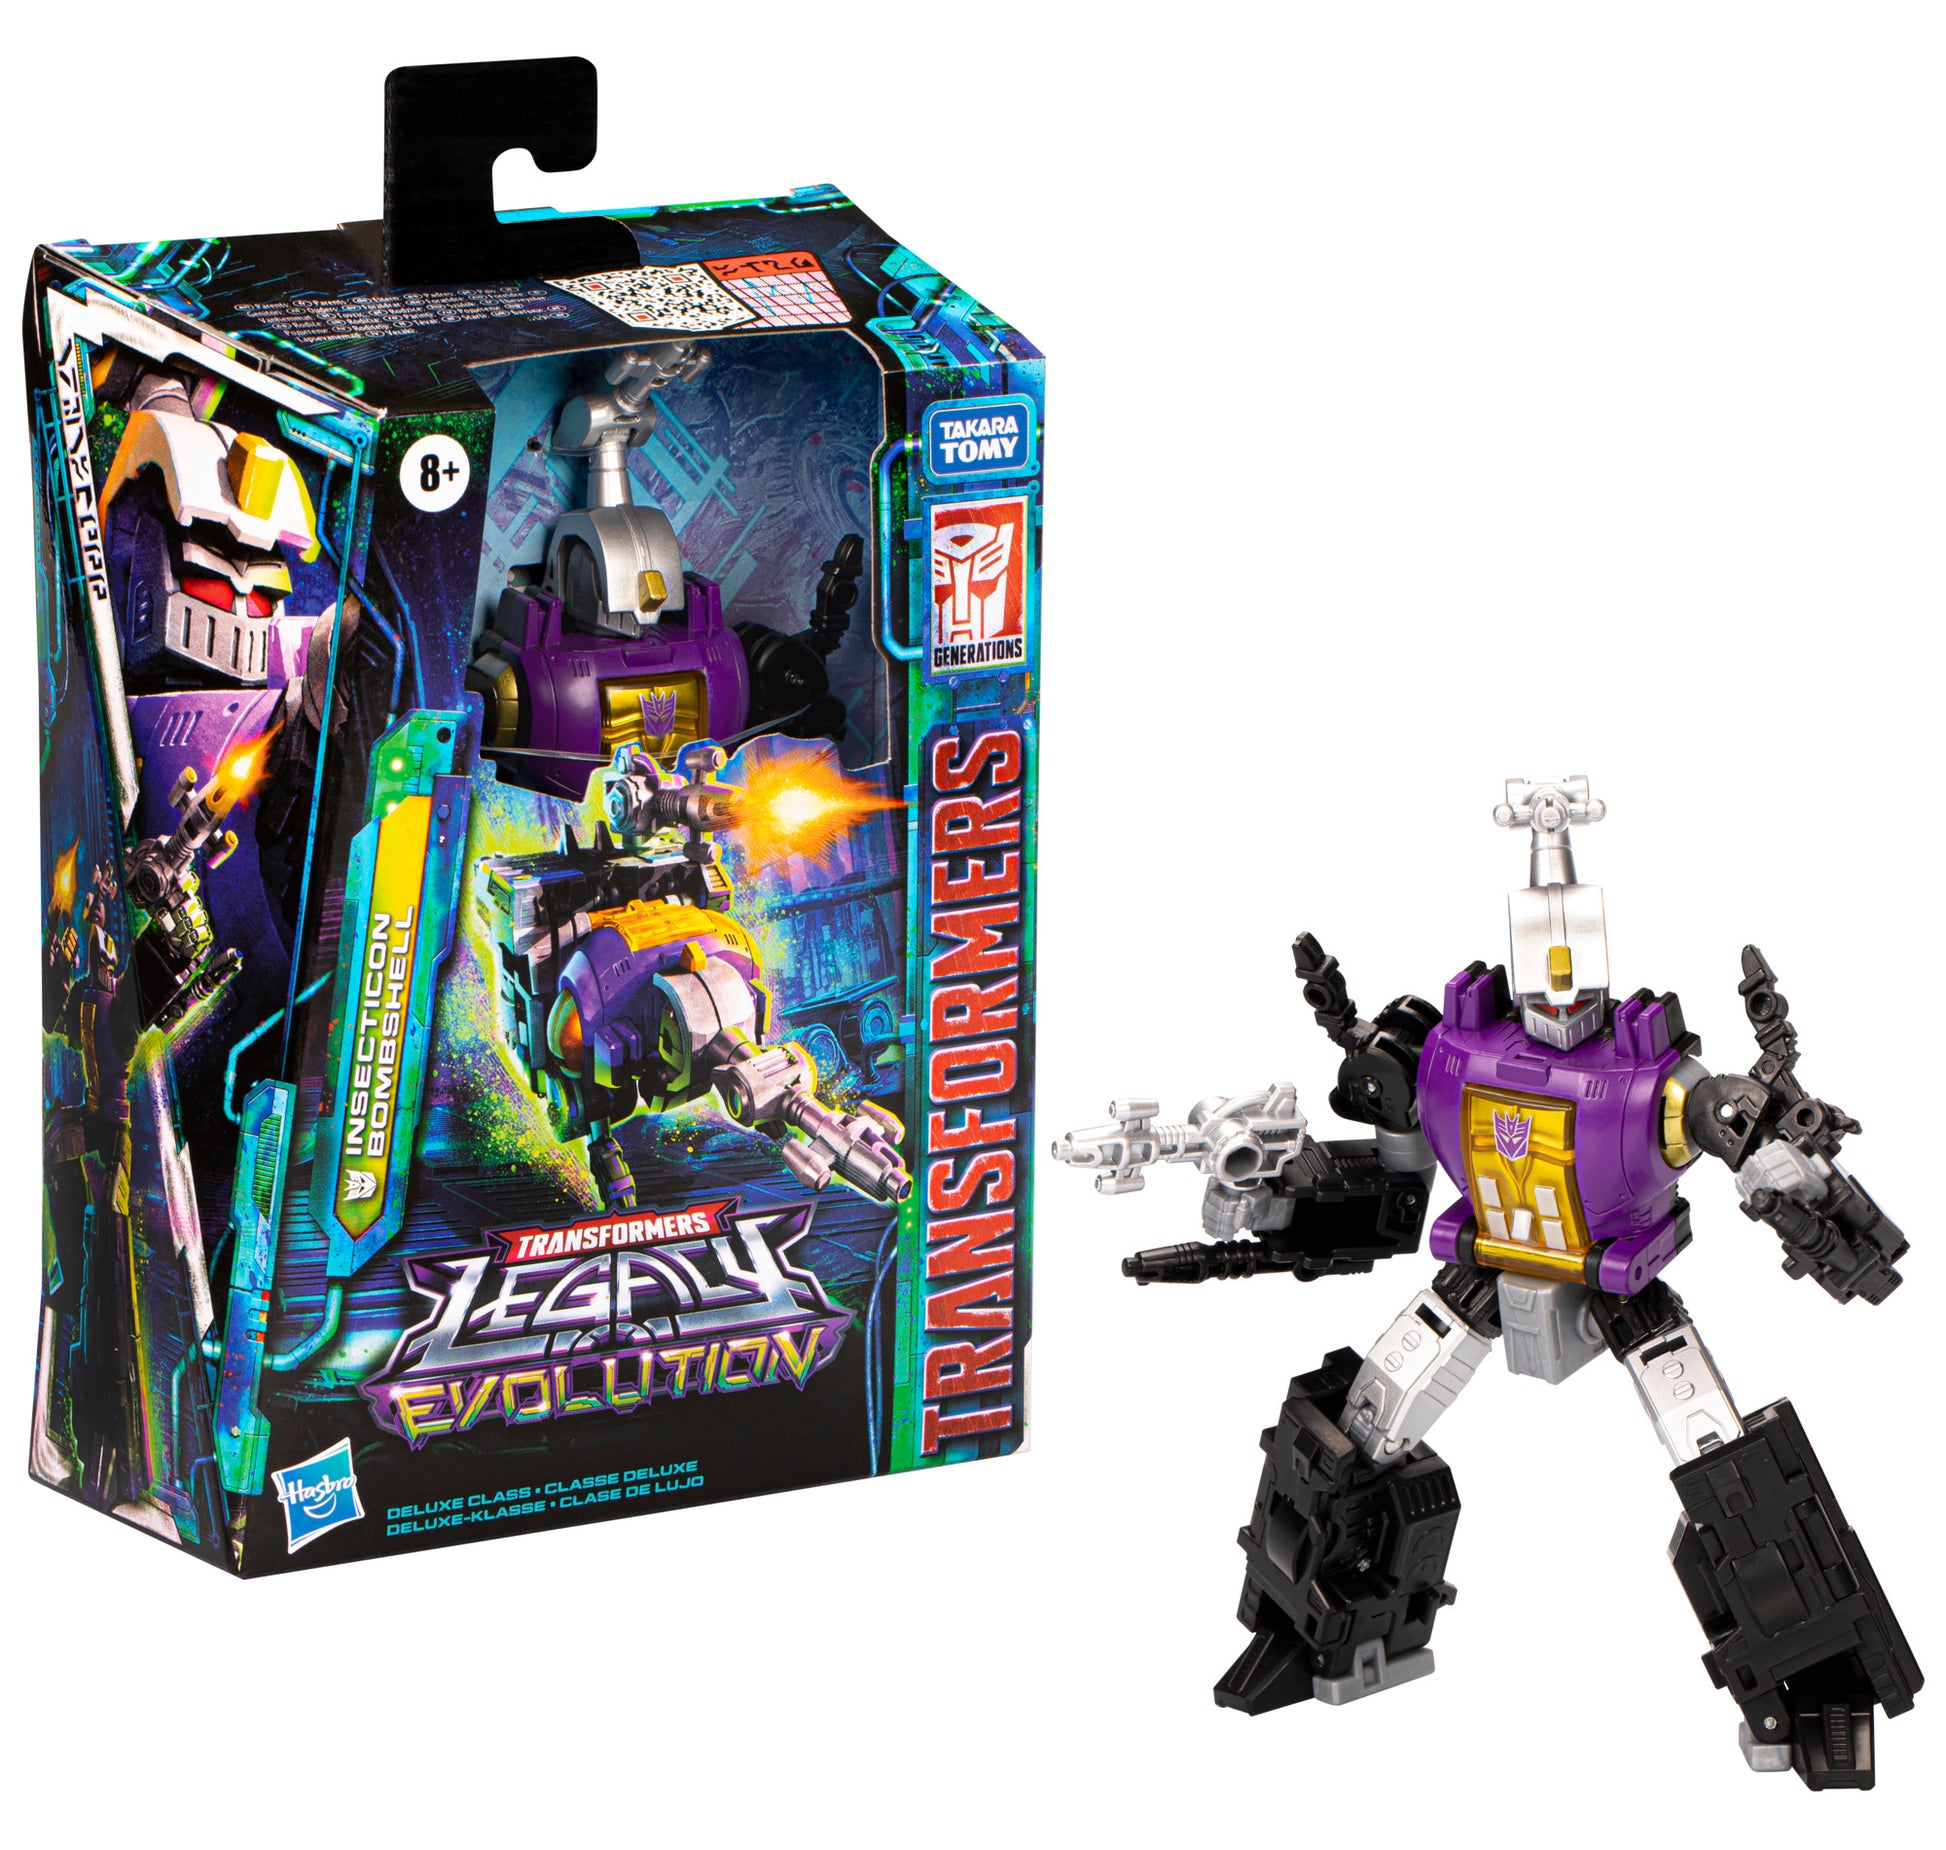 Transformers Legacy Evolution Deluxe Class Insecticon Bombshell Action Figure Toy - Heretoserveyou